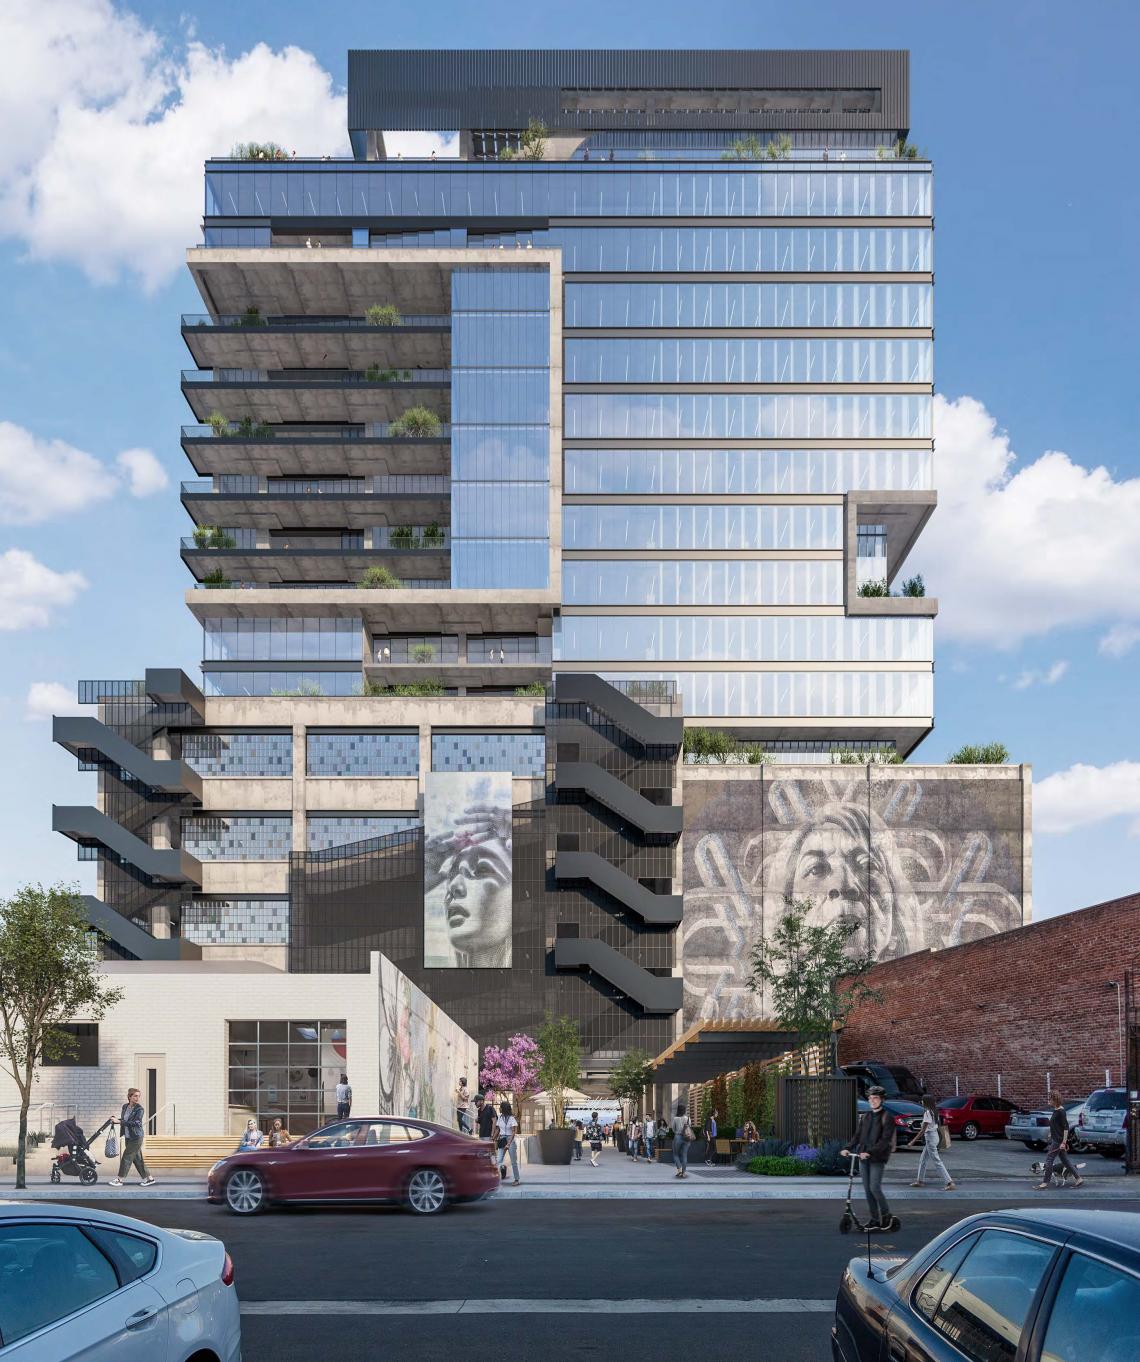 18-story, 340,000SF office building slated for Arts District | Urbanize LA